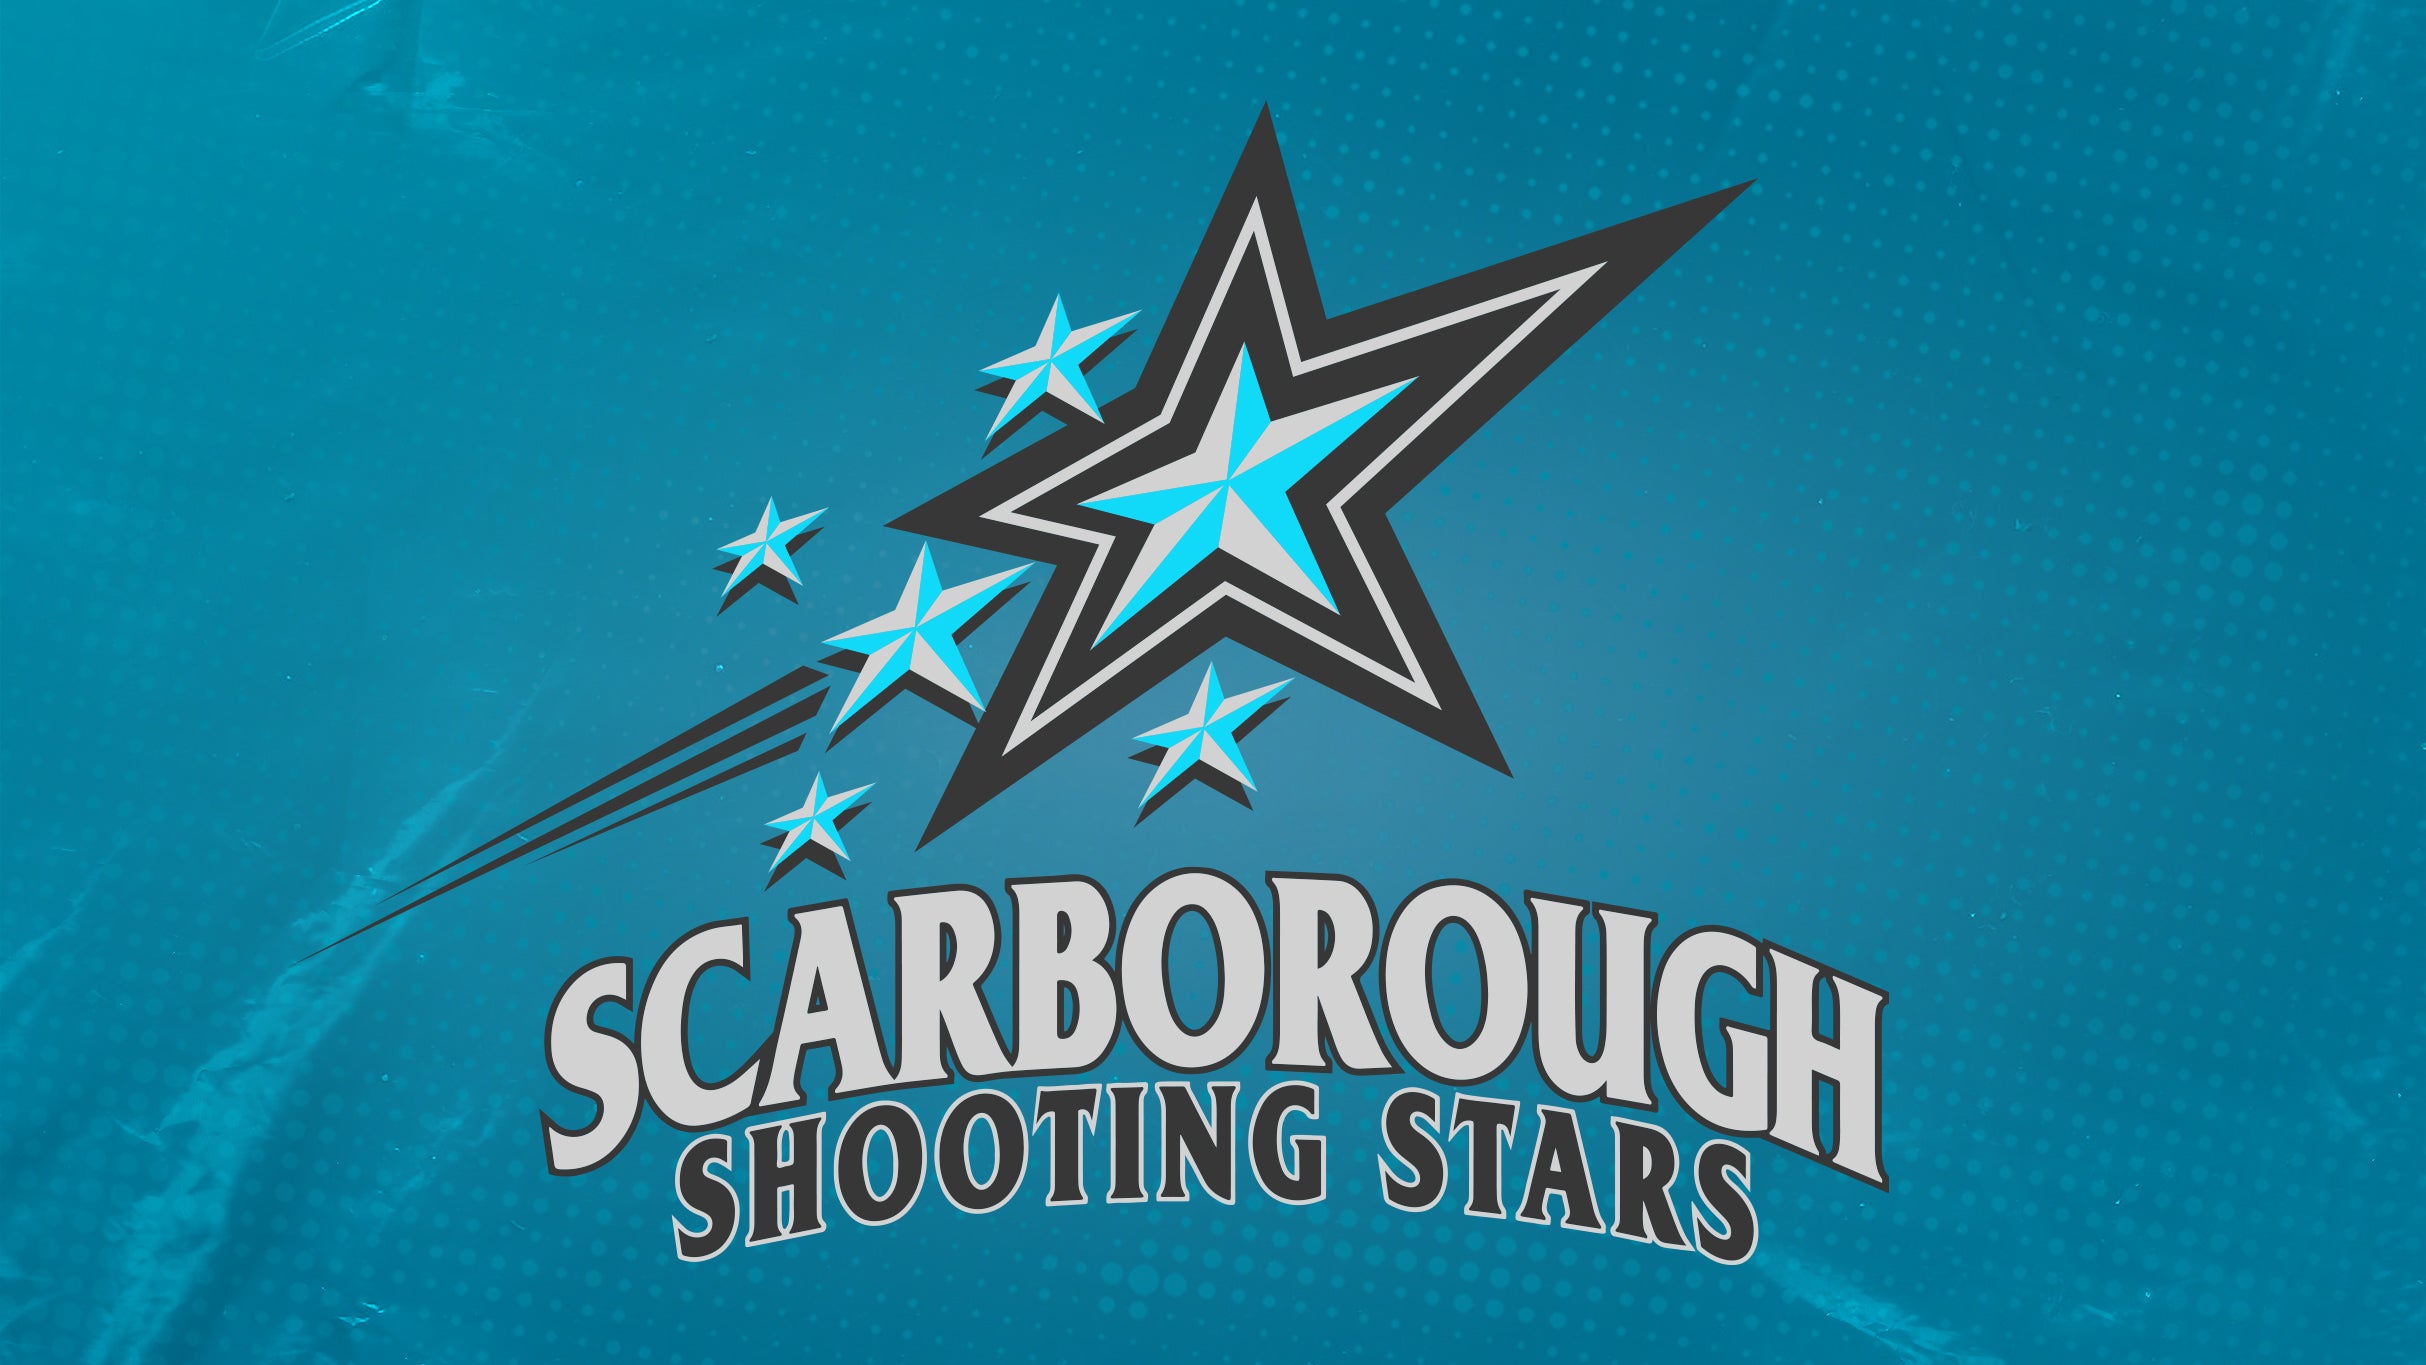 Scarborough Shooting Stars vs. Montreal Alliance presale code for show tickets in Toronto, ON (Toronto Pan Am Sports Centre)